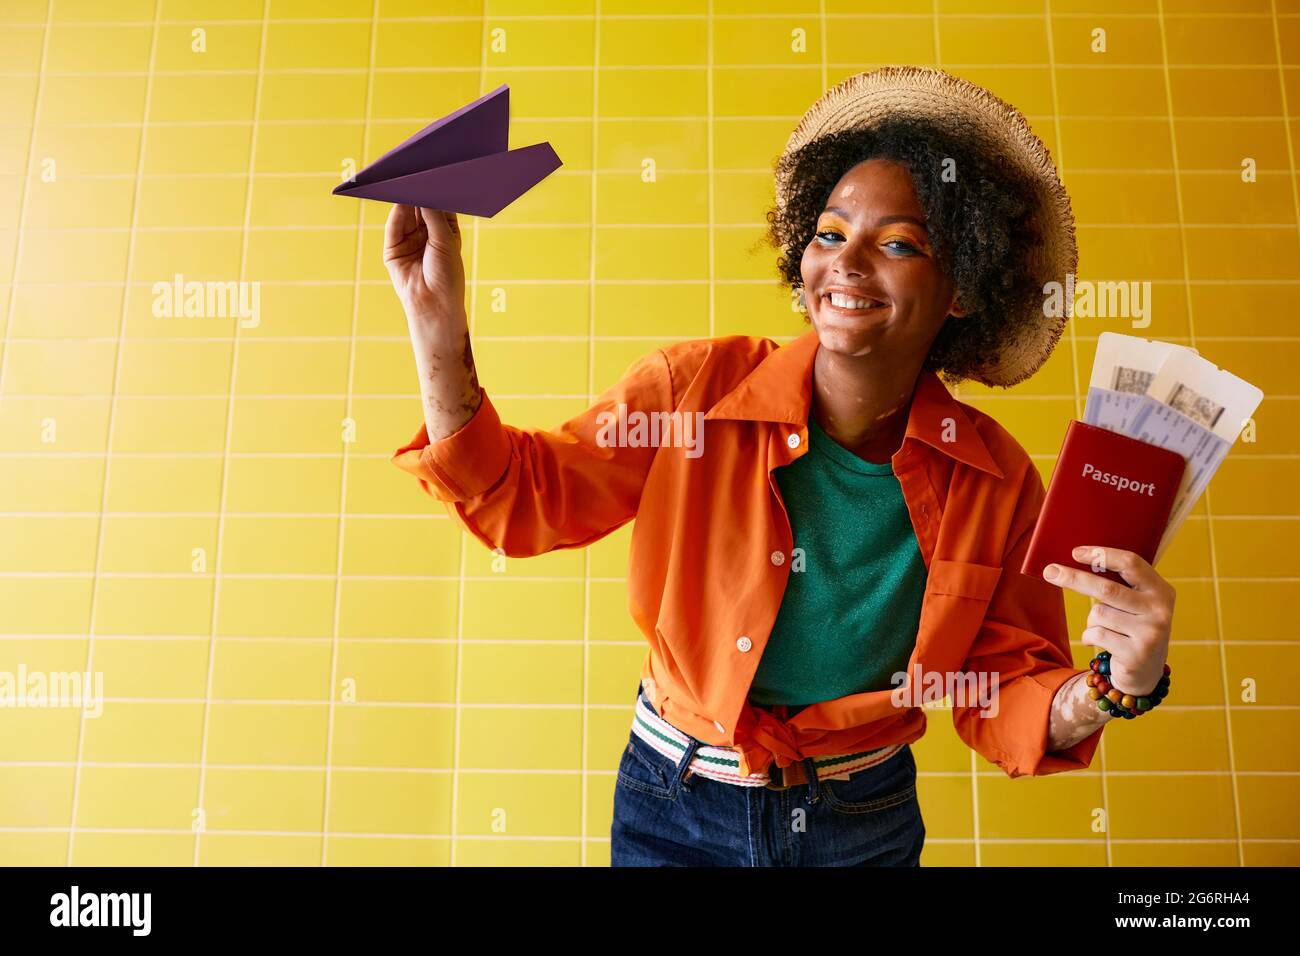 Air travel concept. Smiling multi-ethnic woman with air tickets and international passport throws paper airplane simulating air traveling, over yellow Stock Photo